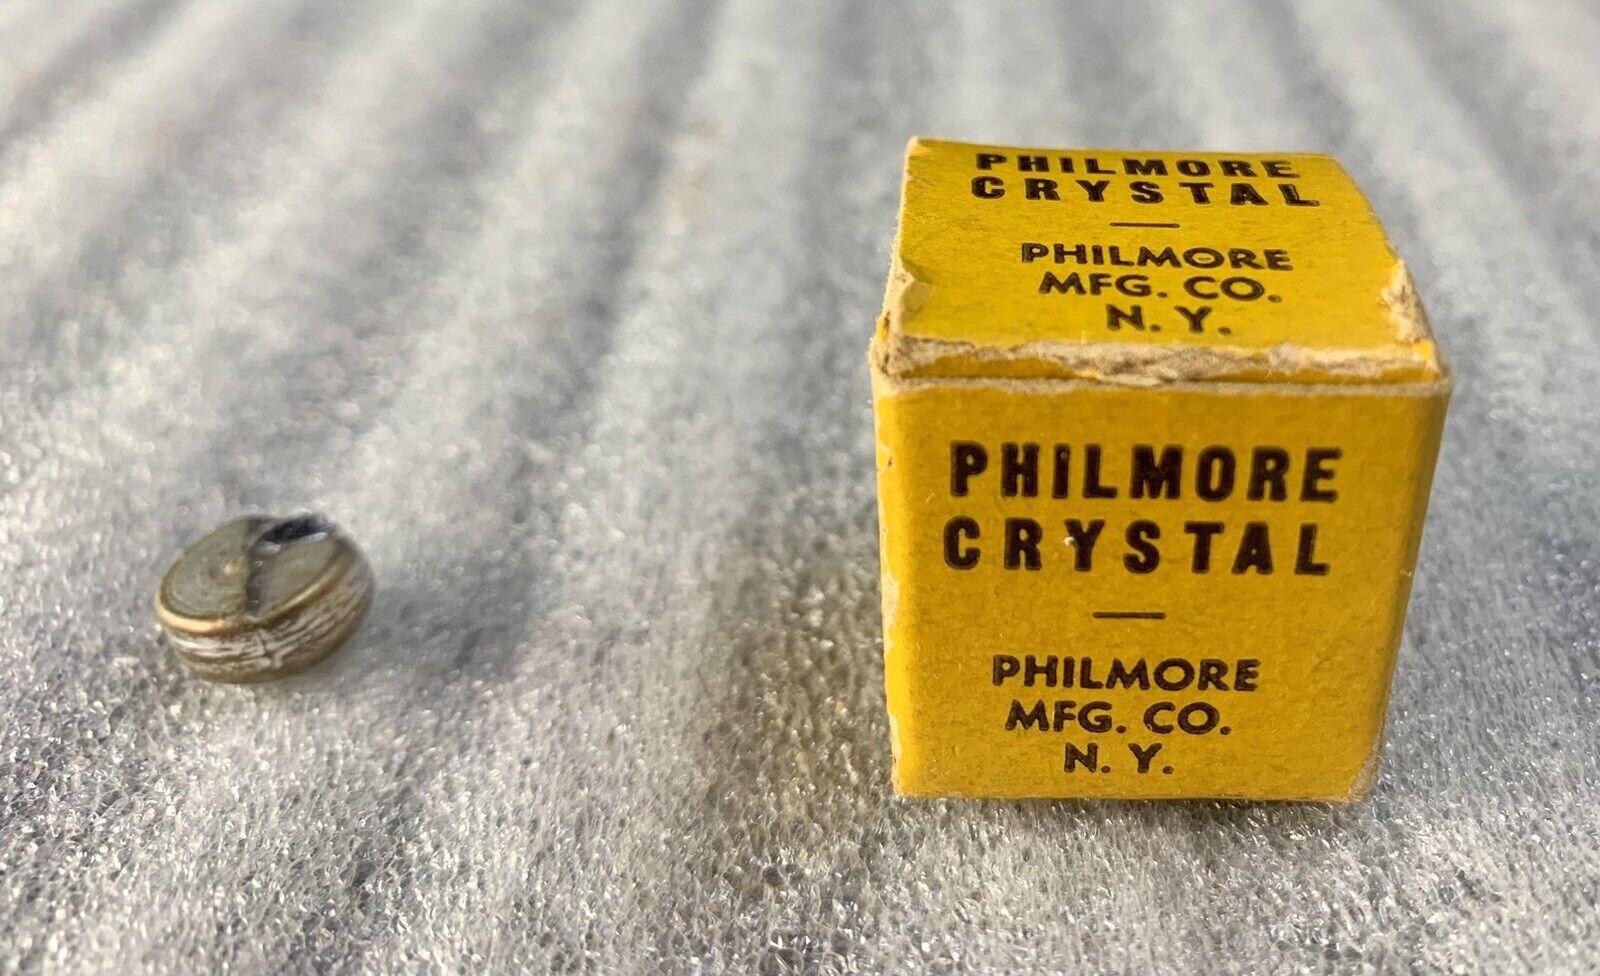 PHILMORE CRYSTAL IN BOX ABOUT ONE INCH SQUARE - PHILMORE MANUFACTURING